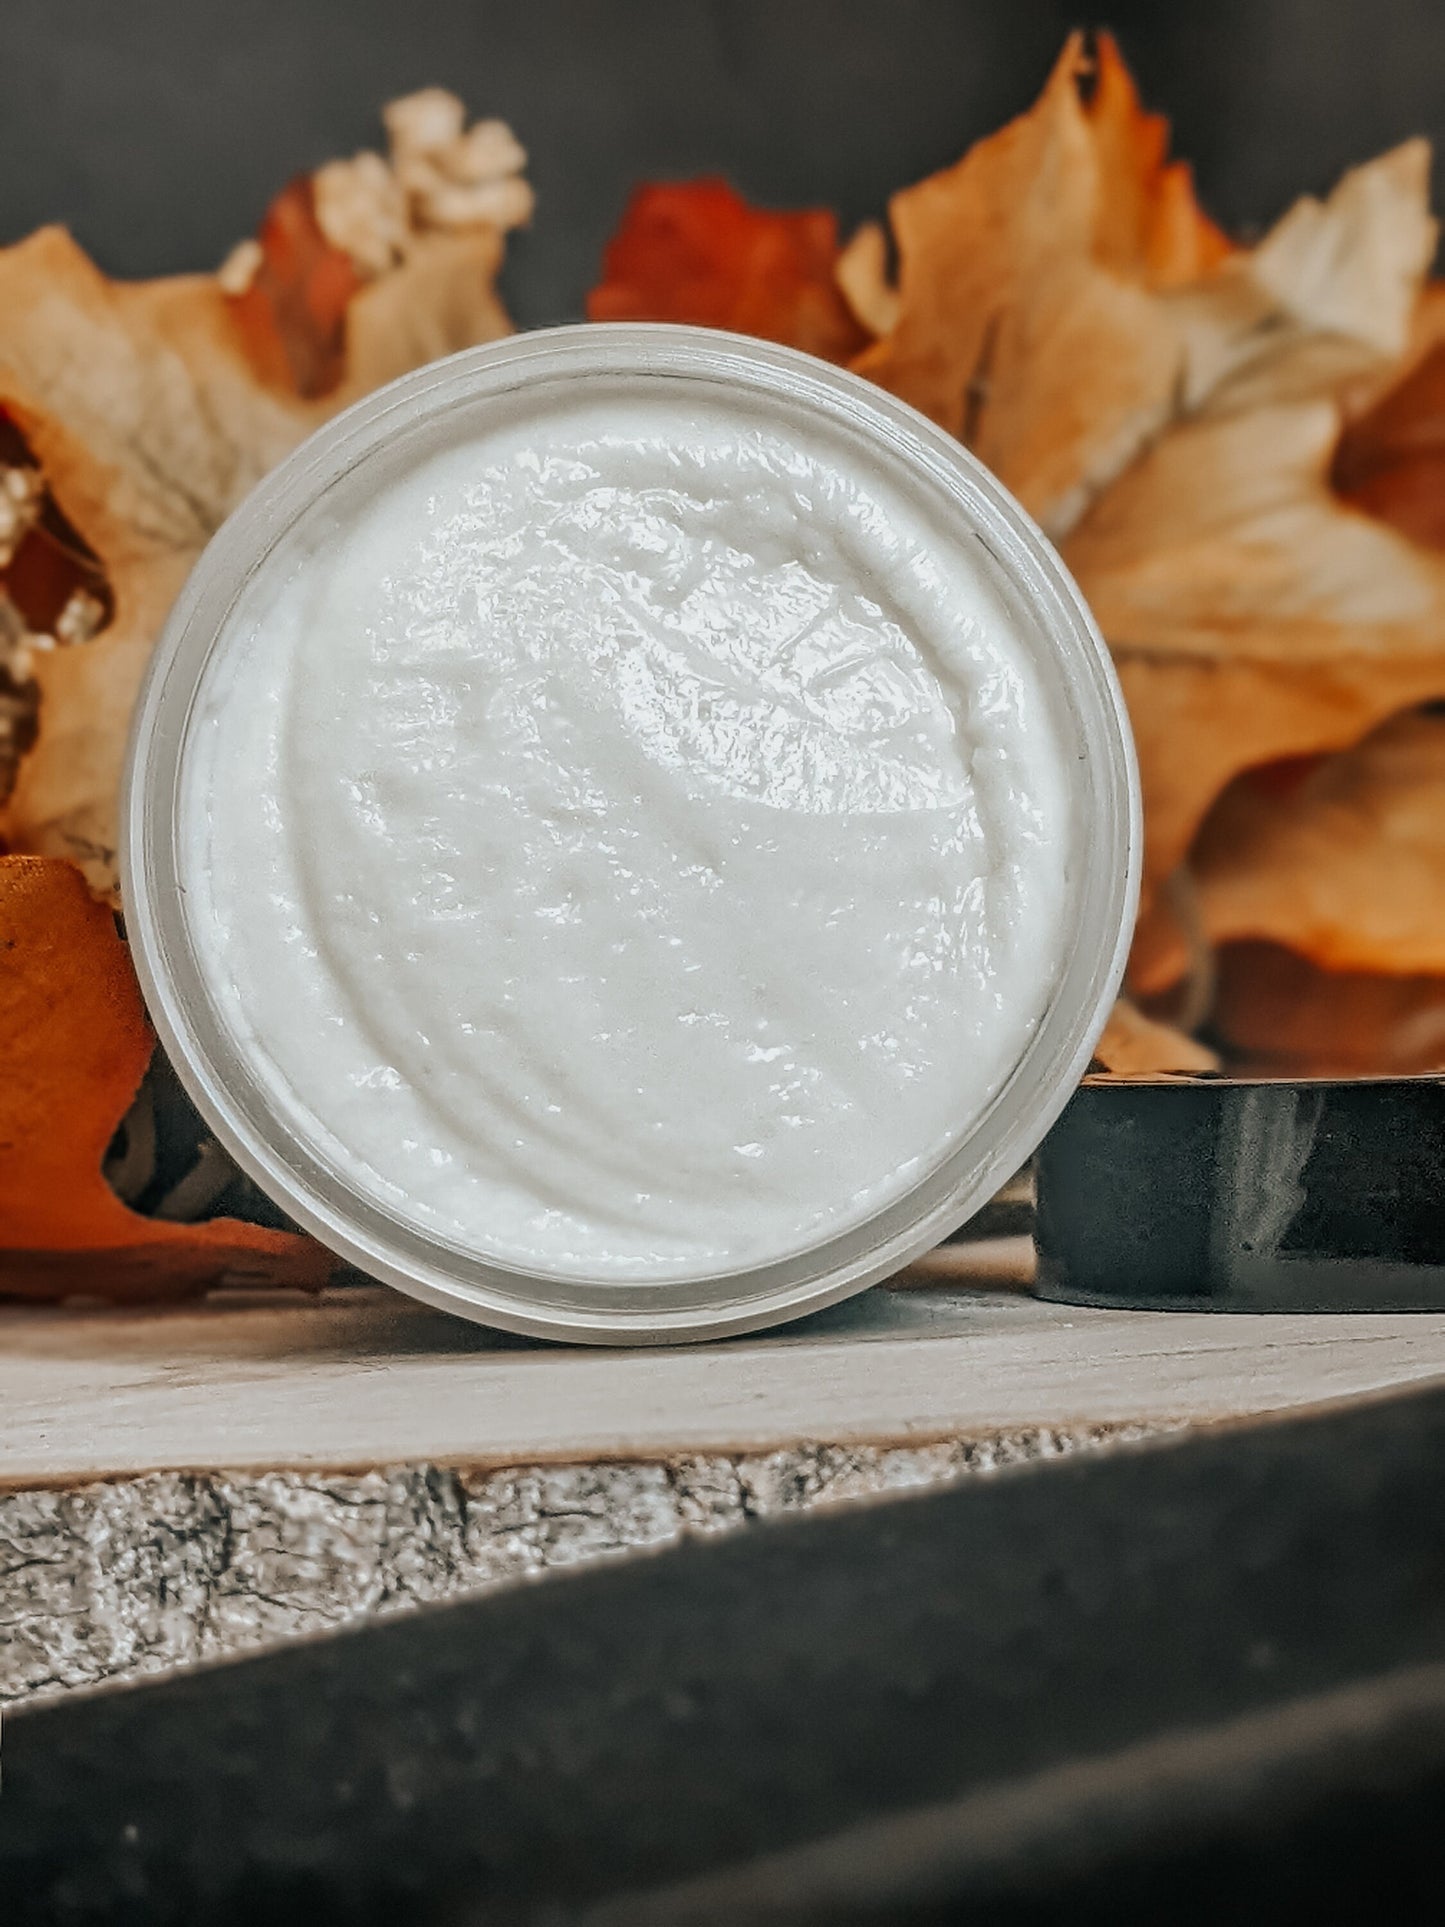 SALEM - Fresh breeze and ylang scented, Vegan whipped body butter, Shea, mango butter, moisturizer, gothic skincare, fall fragrance, autumn